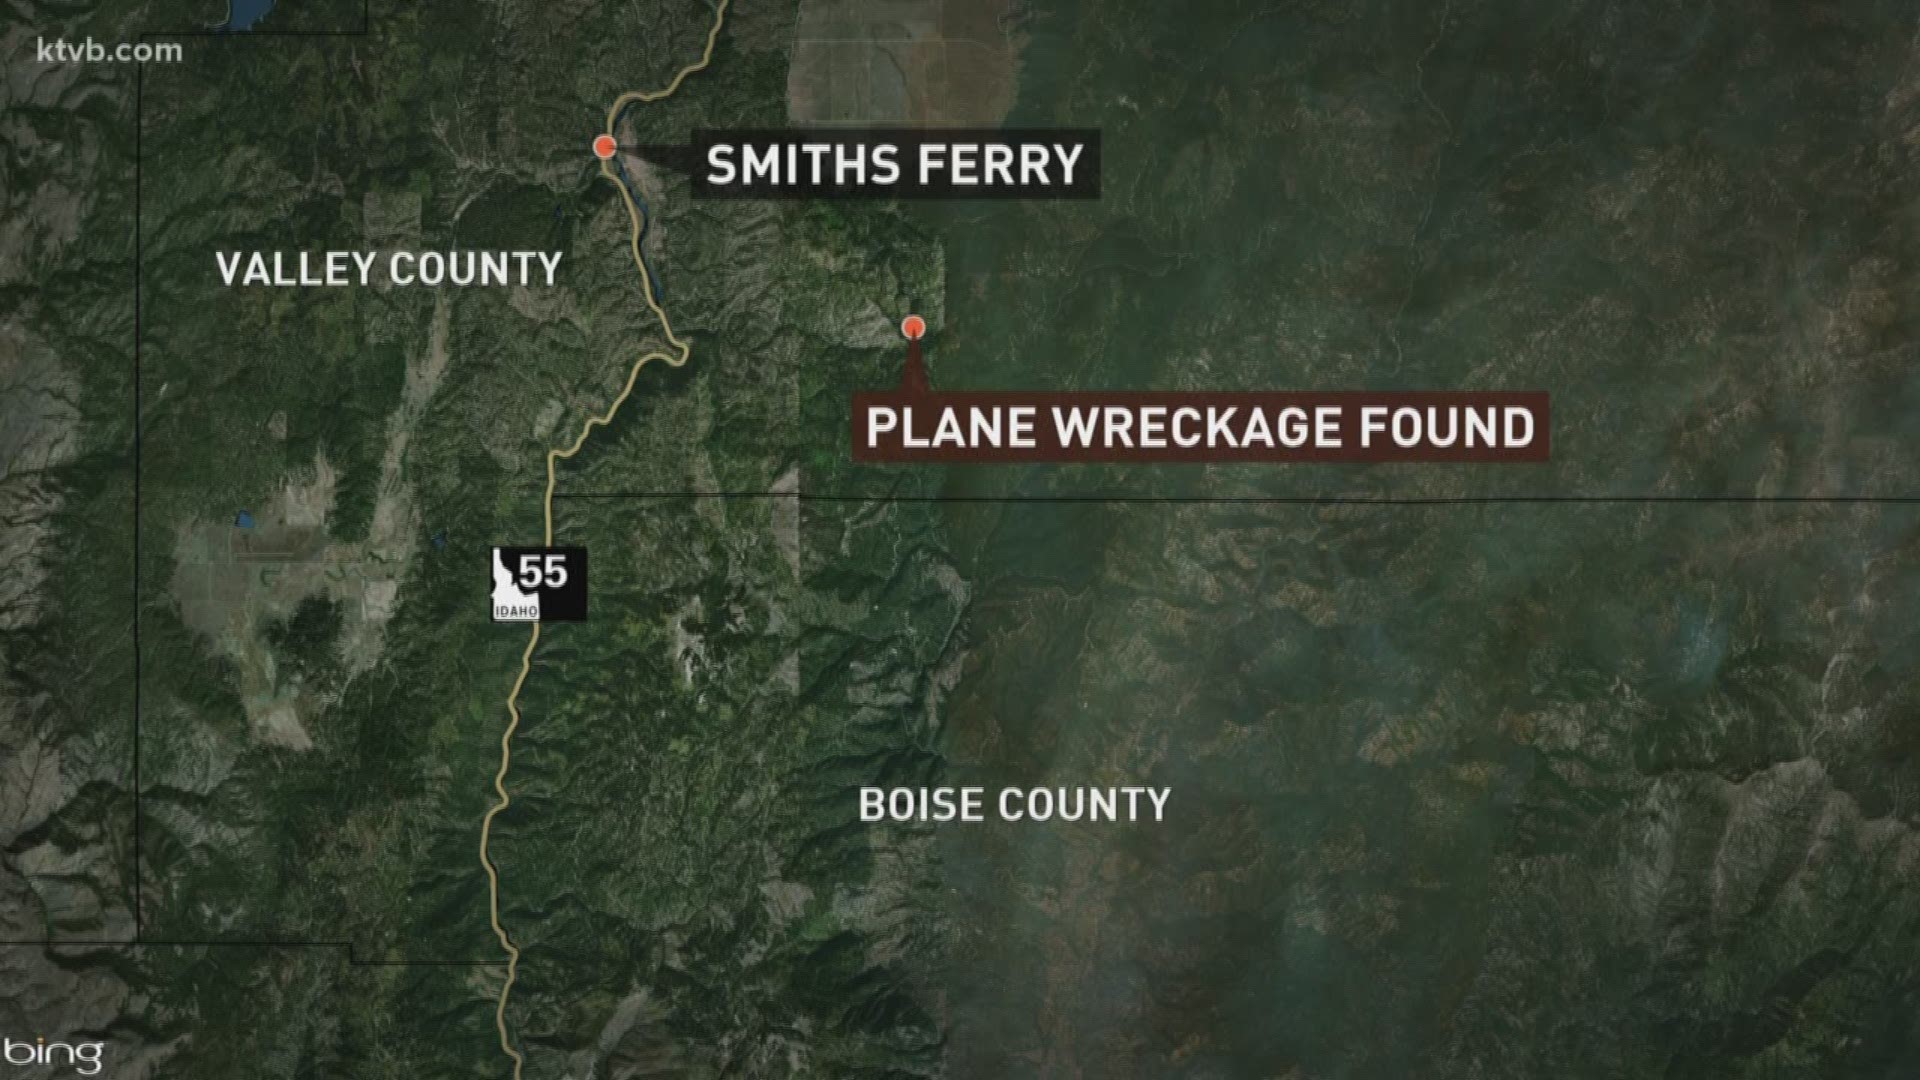 A Boise man died when his Cessna crashed in the mountains south of Smiths Ferry.